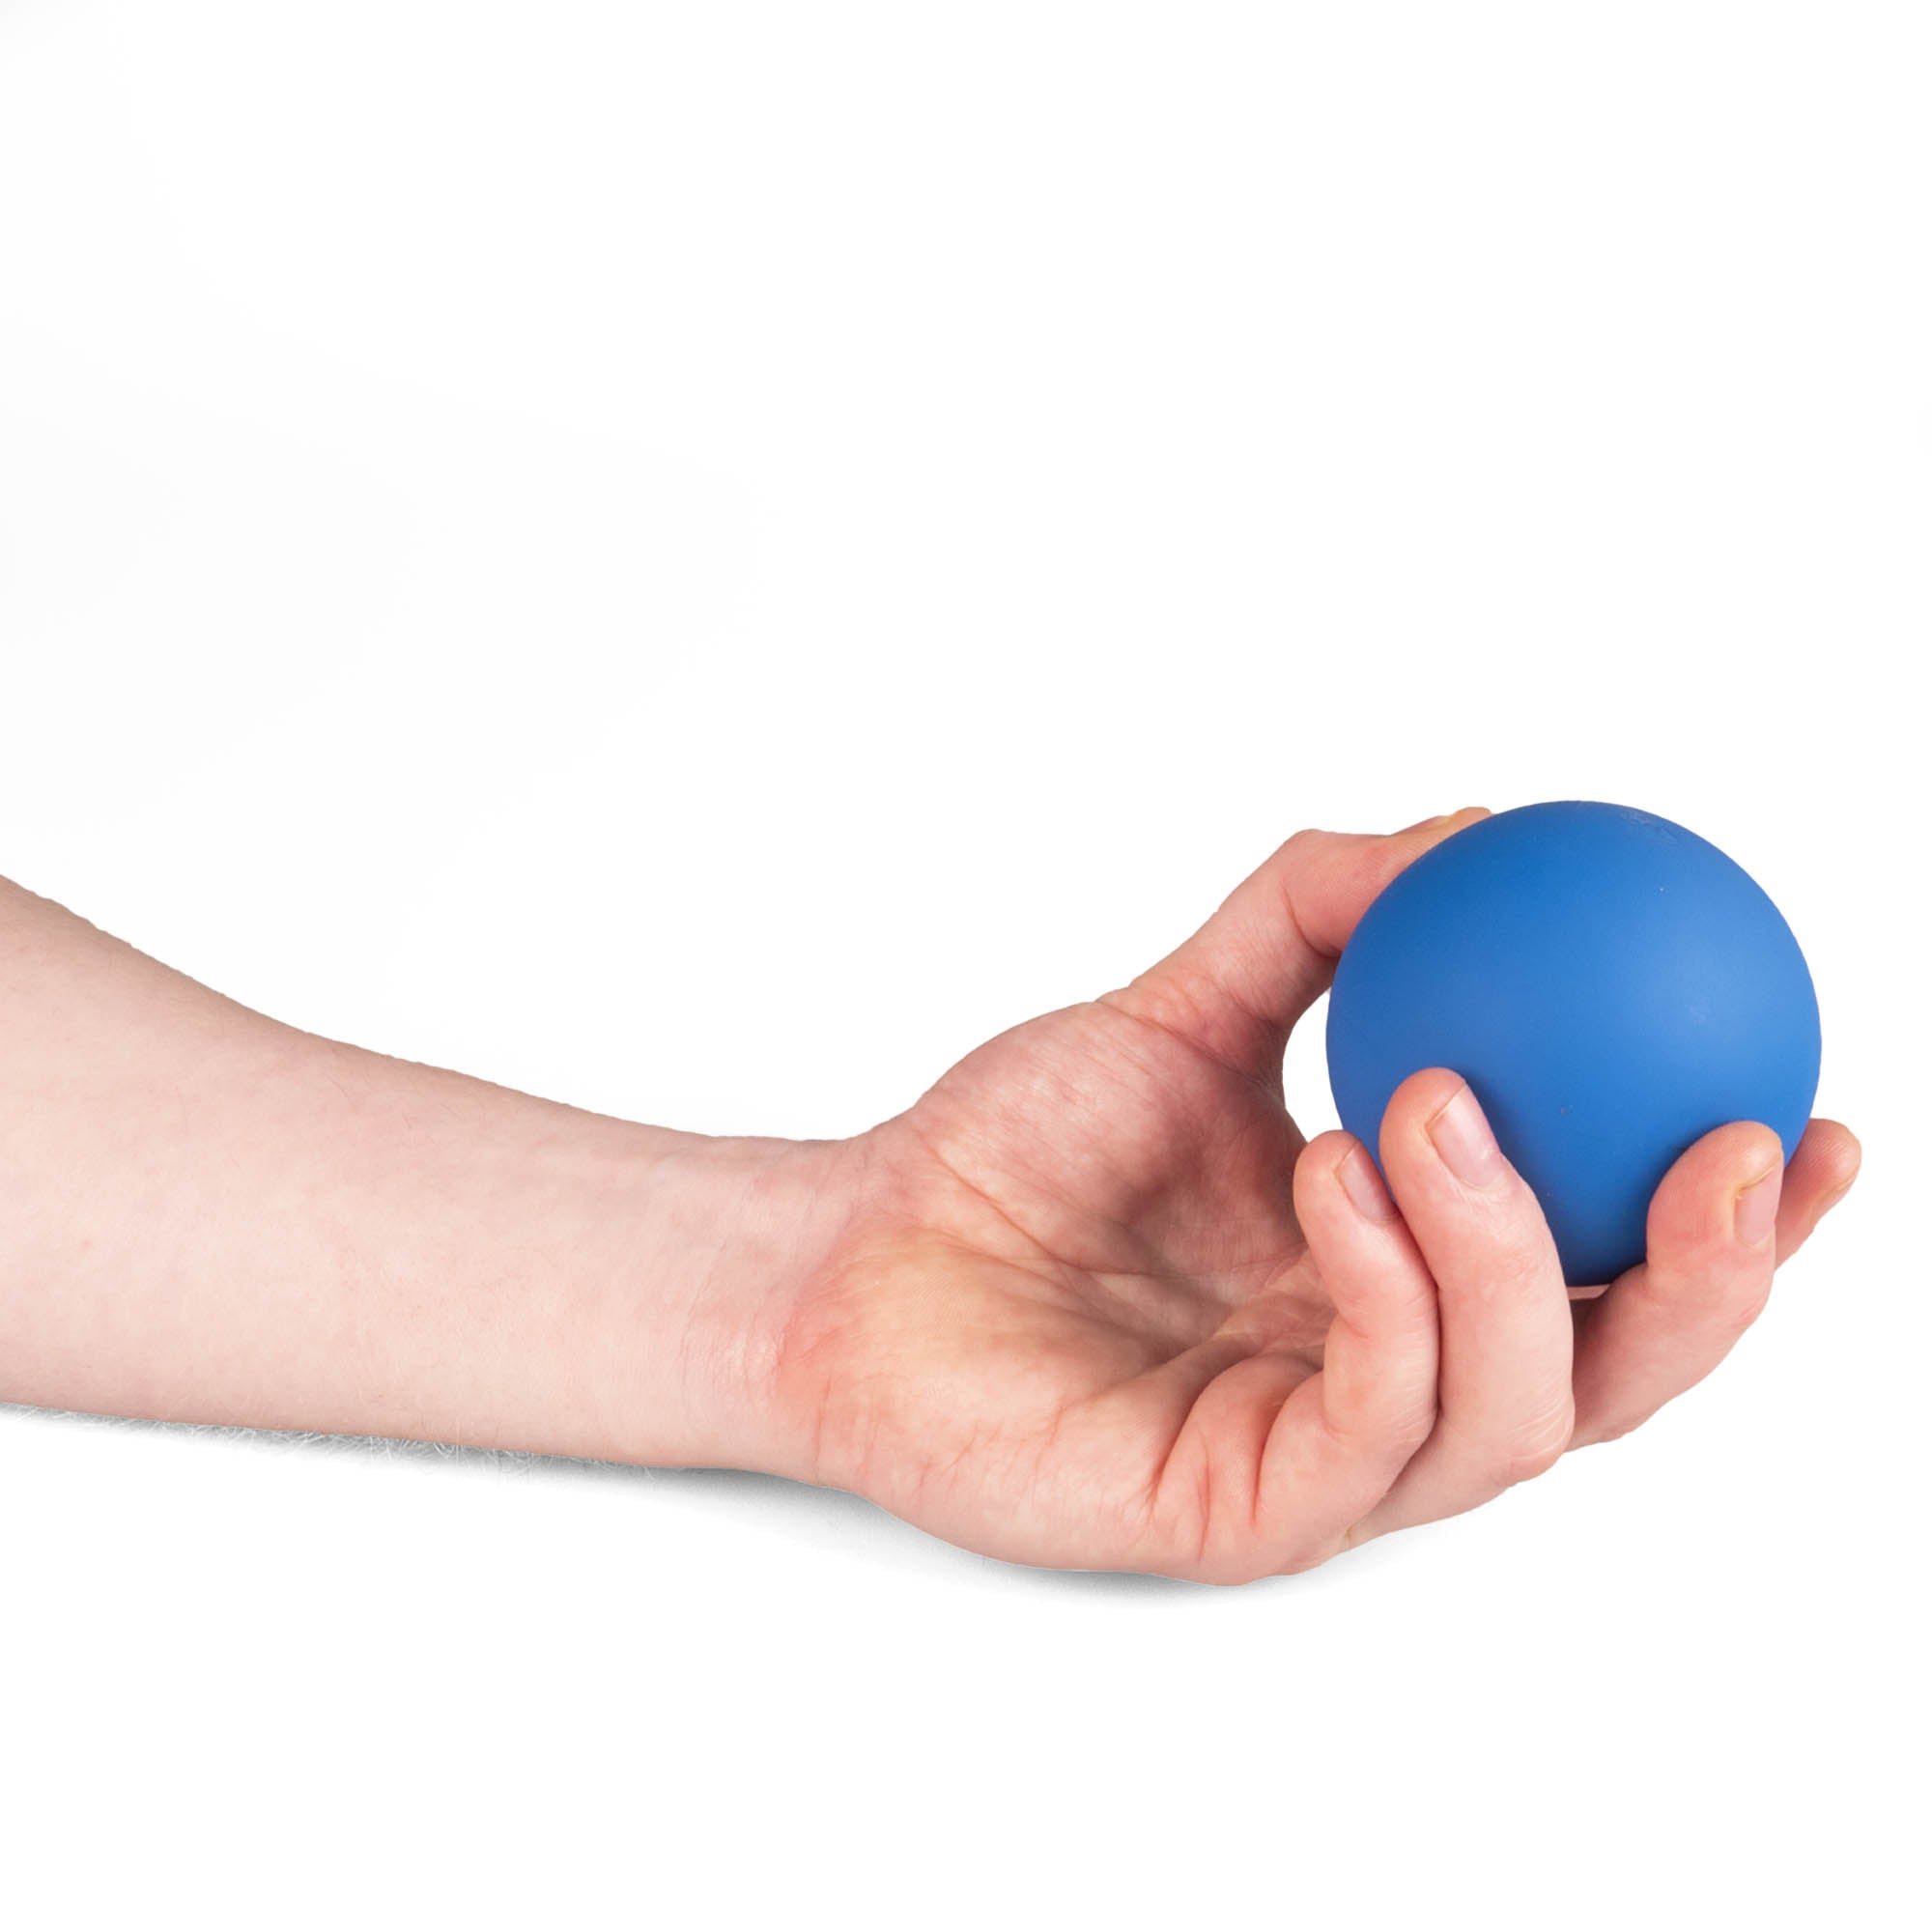 Single blue Mr Babache russian juggling ball in hand